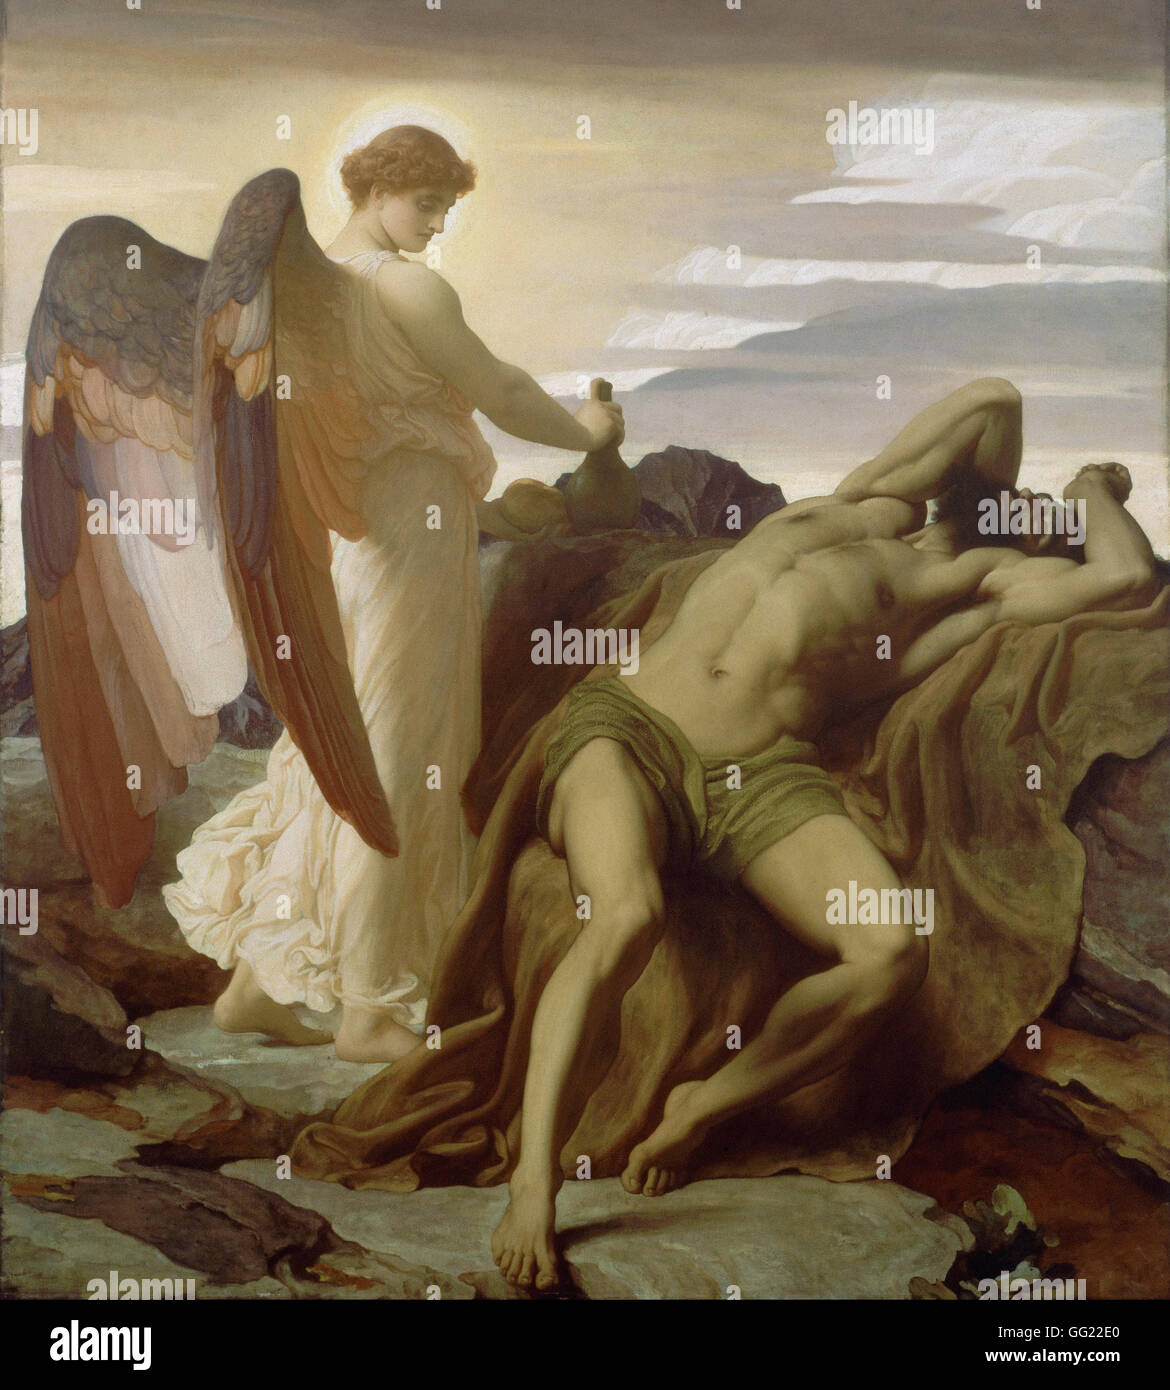 Frederic, Lord Leighton - Elijah in the Wilderness Stock Photo